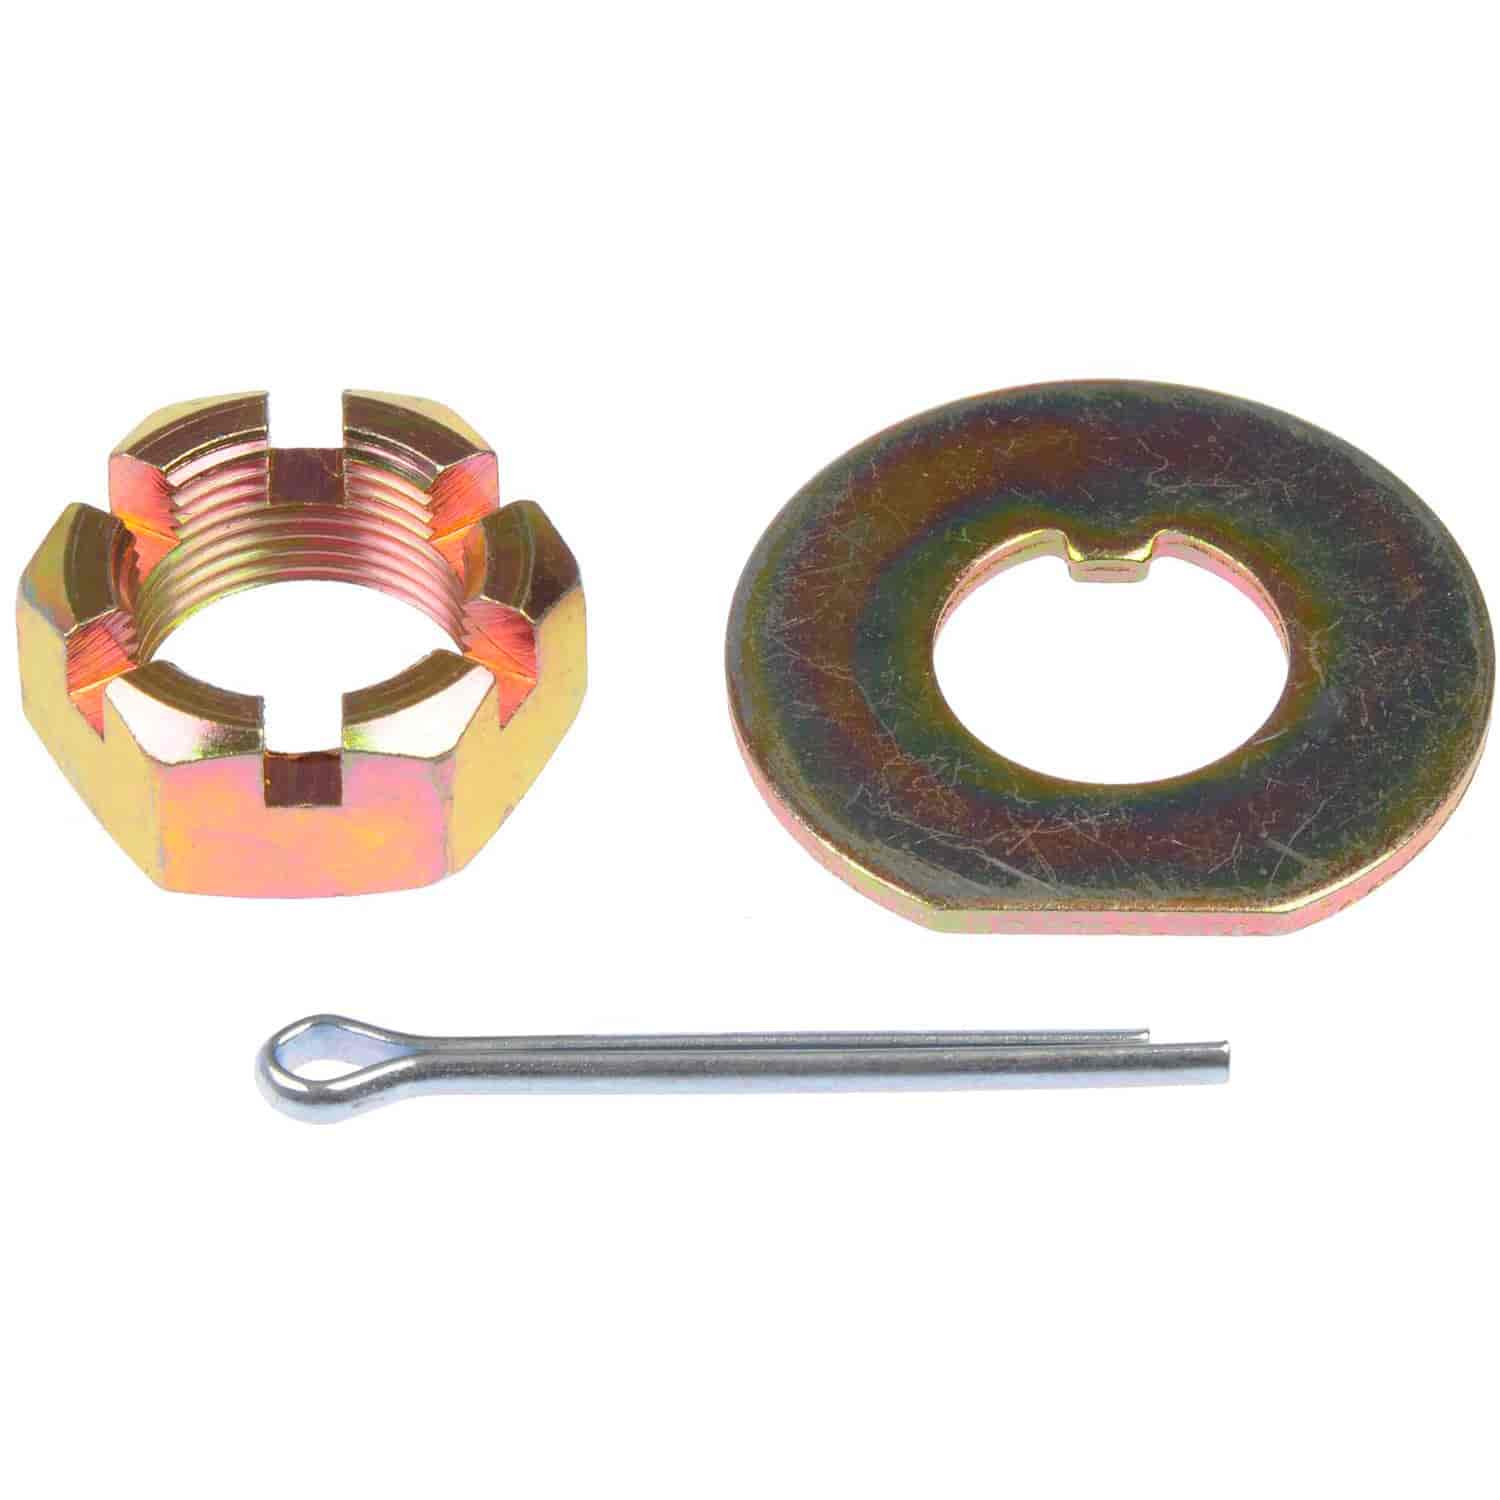 Spindle Nut Kit 3/4-20 Contents Nut Kits Washer